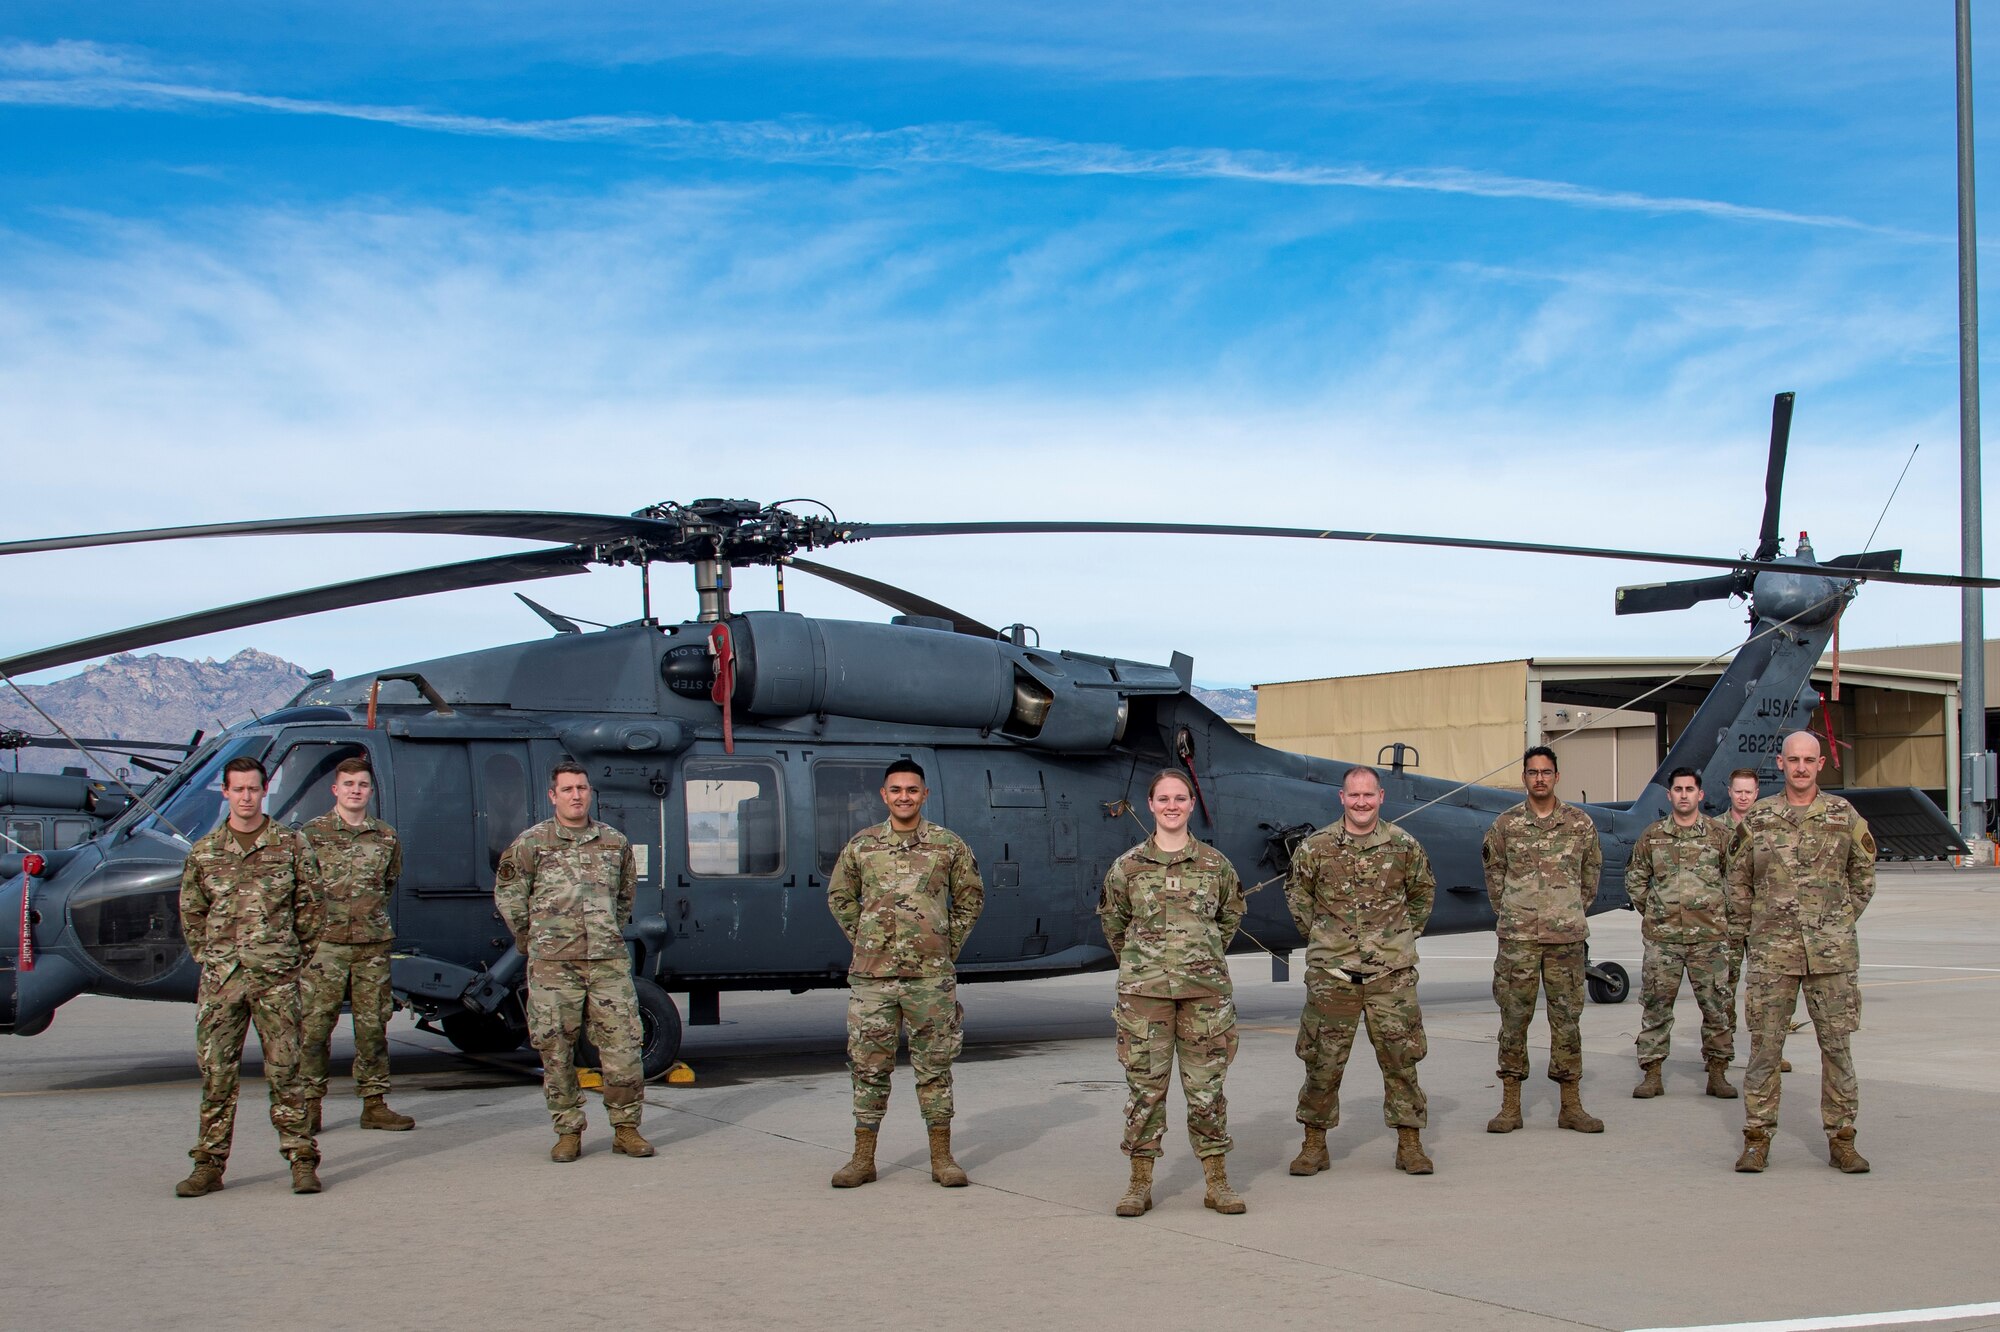 Airmen pose for a photo in front of a helicopter